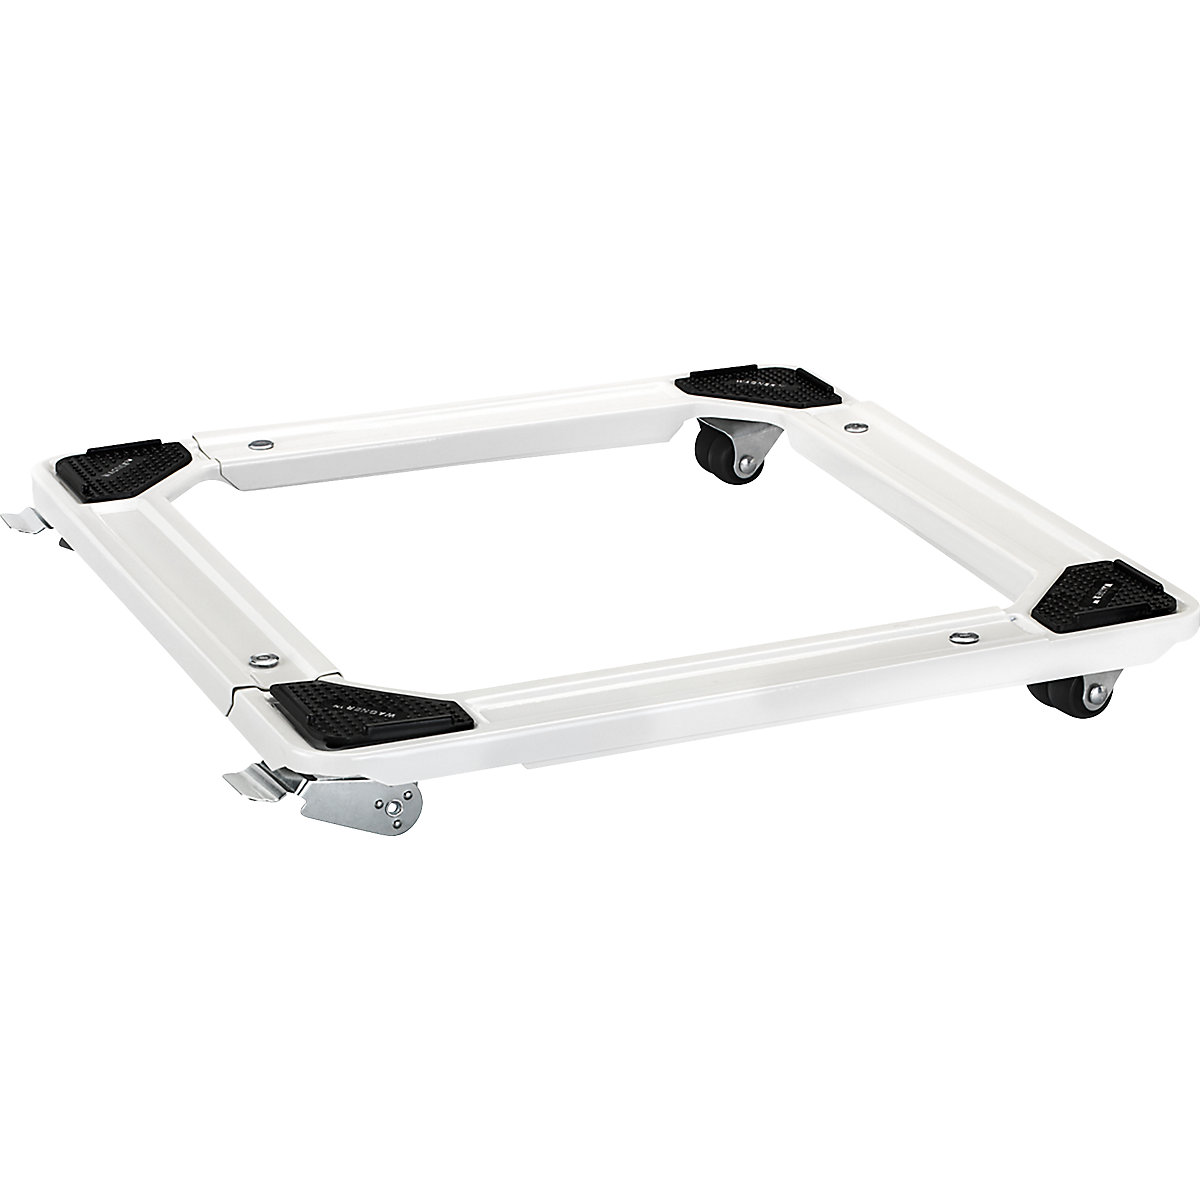 MM 1192 transport dolly – Wagner, LxW 420 x 420 mm, extends to 600 x 600 mm, pack of 2, max. load 150 kg, 5+ packs-4